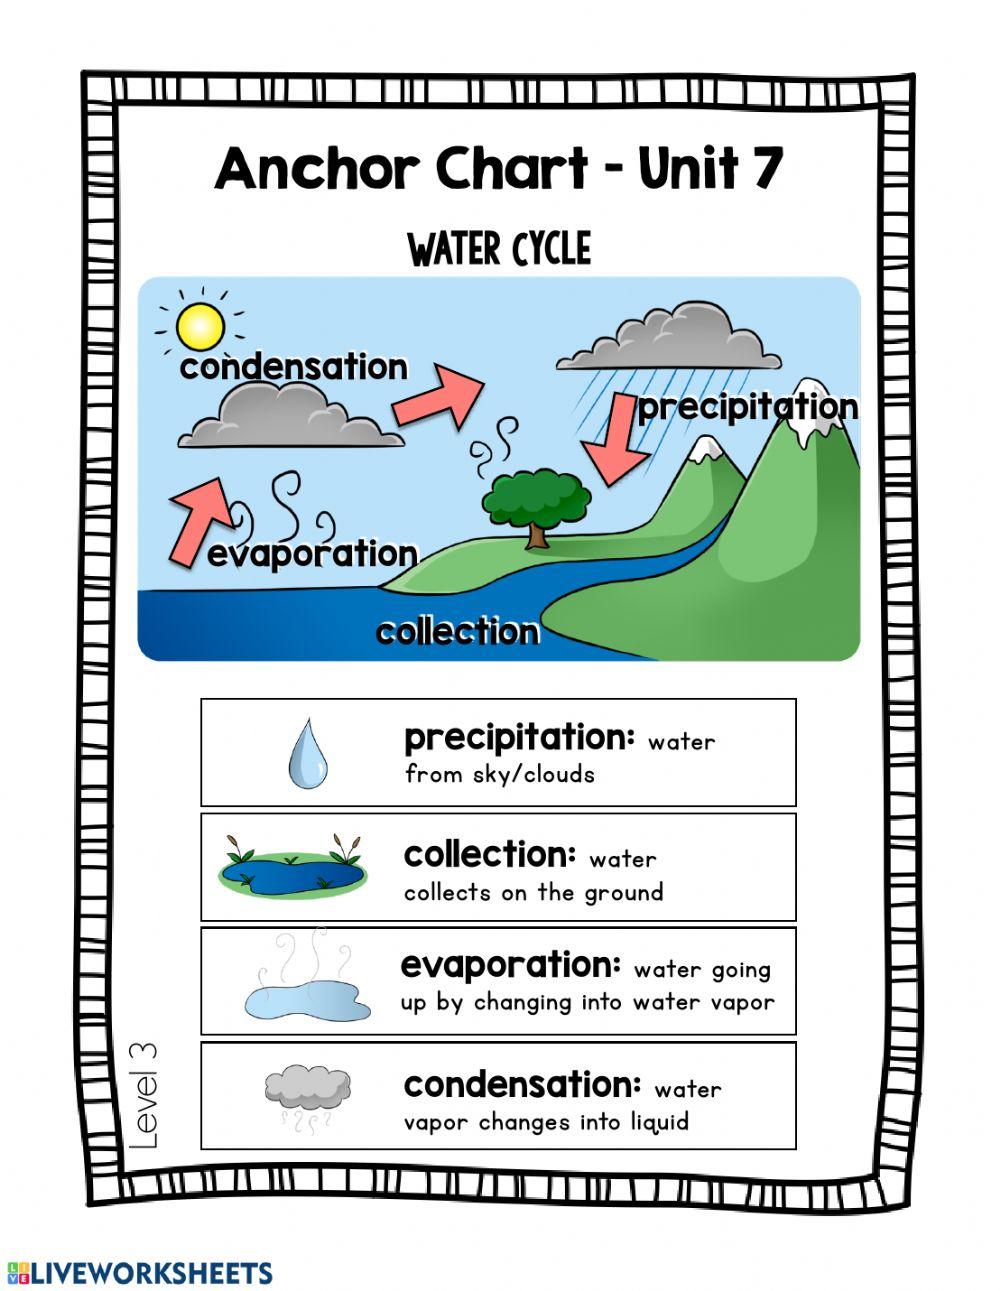 The Water Cycle - Day 3 worksheet | Live Worksheets